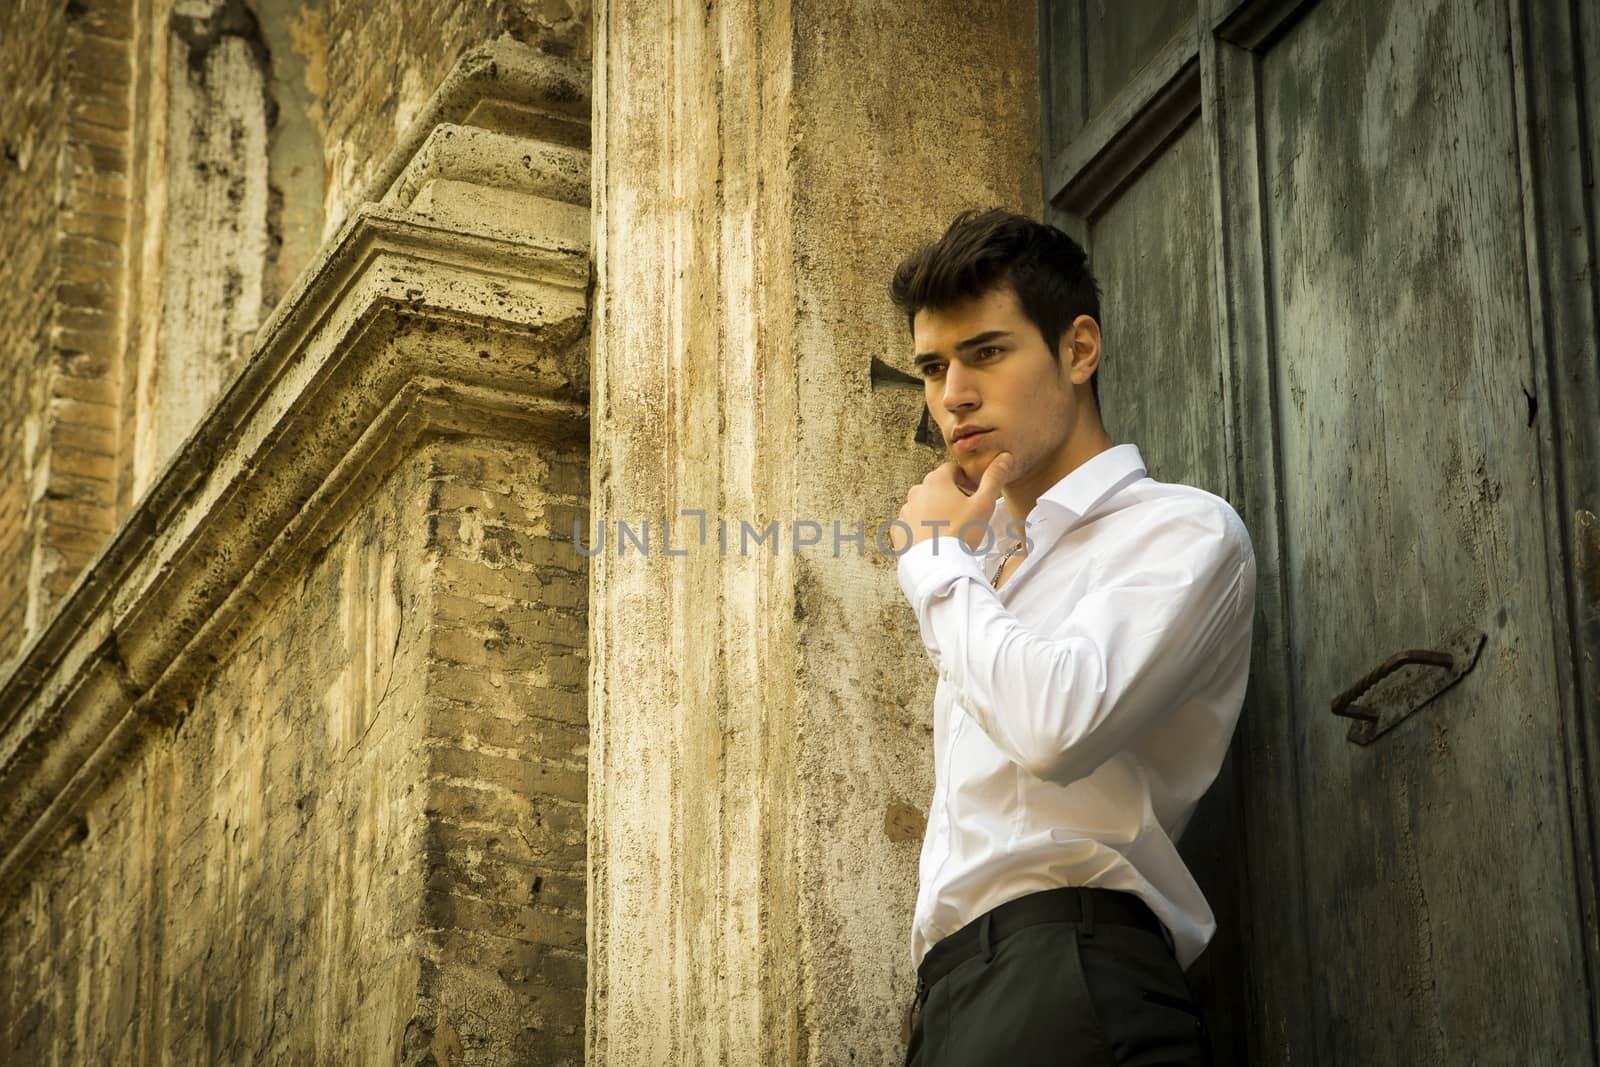 Elegant young man leaning against old wall and door, shot from below